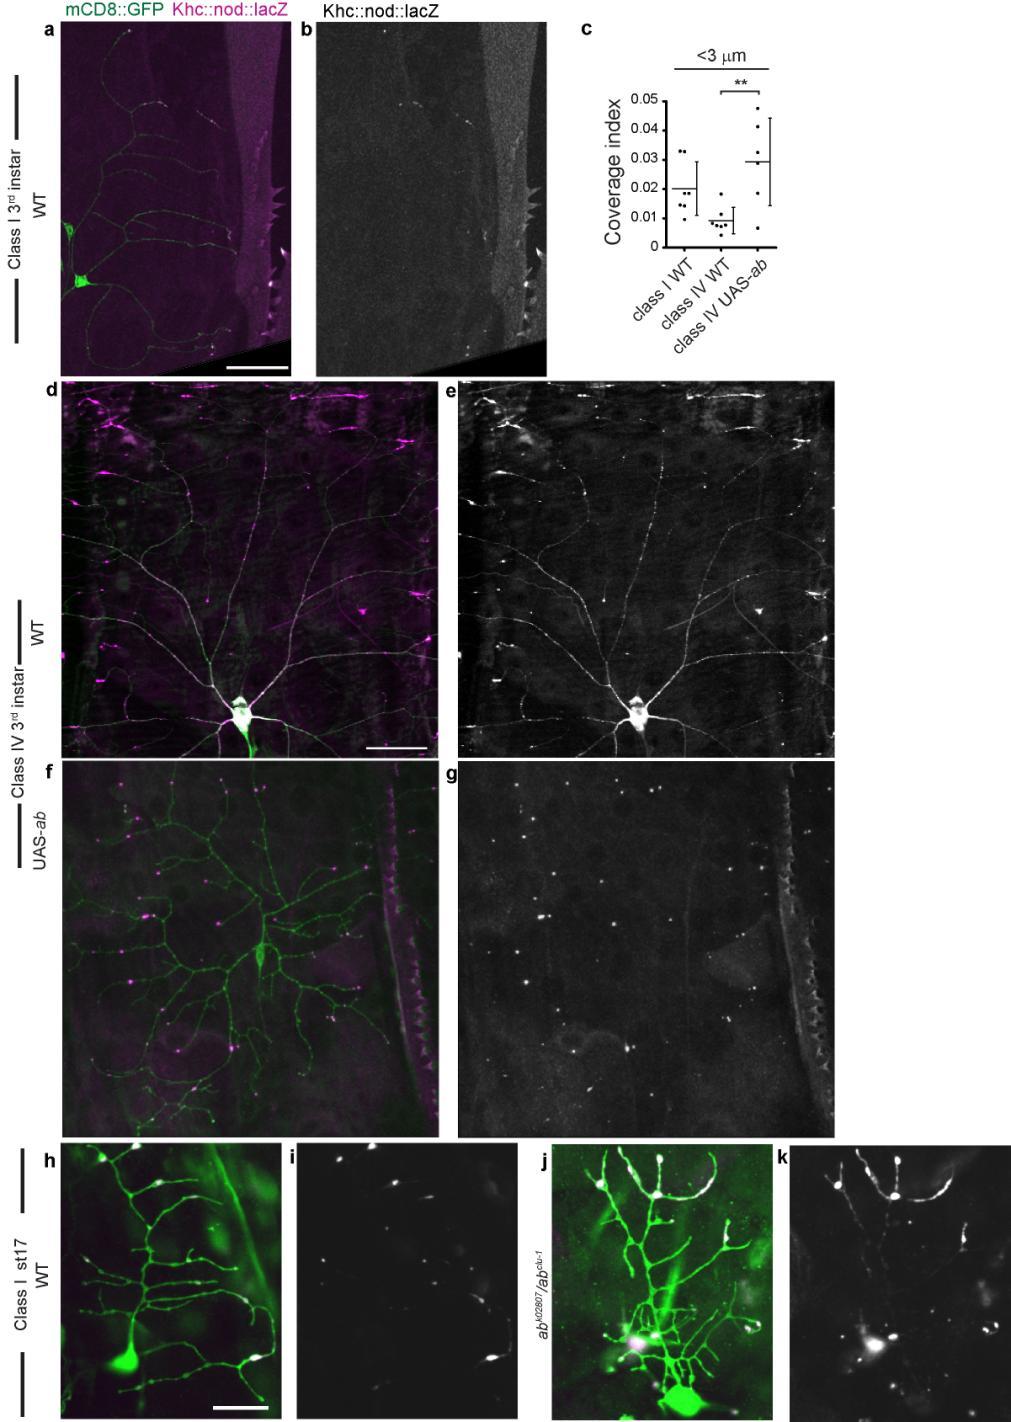 Supplementary Figure 1 Neuron class-specific arrangements of Khc::nod::lacZ label in dendrites. Staining with fluorescence antibodies to detect GFP (Green), β-galactosidase (magenta/white).